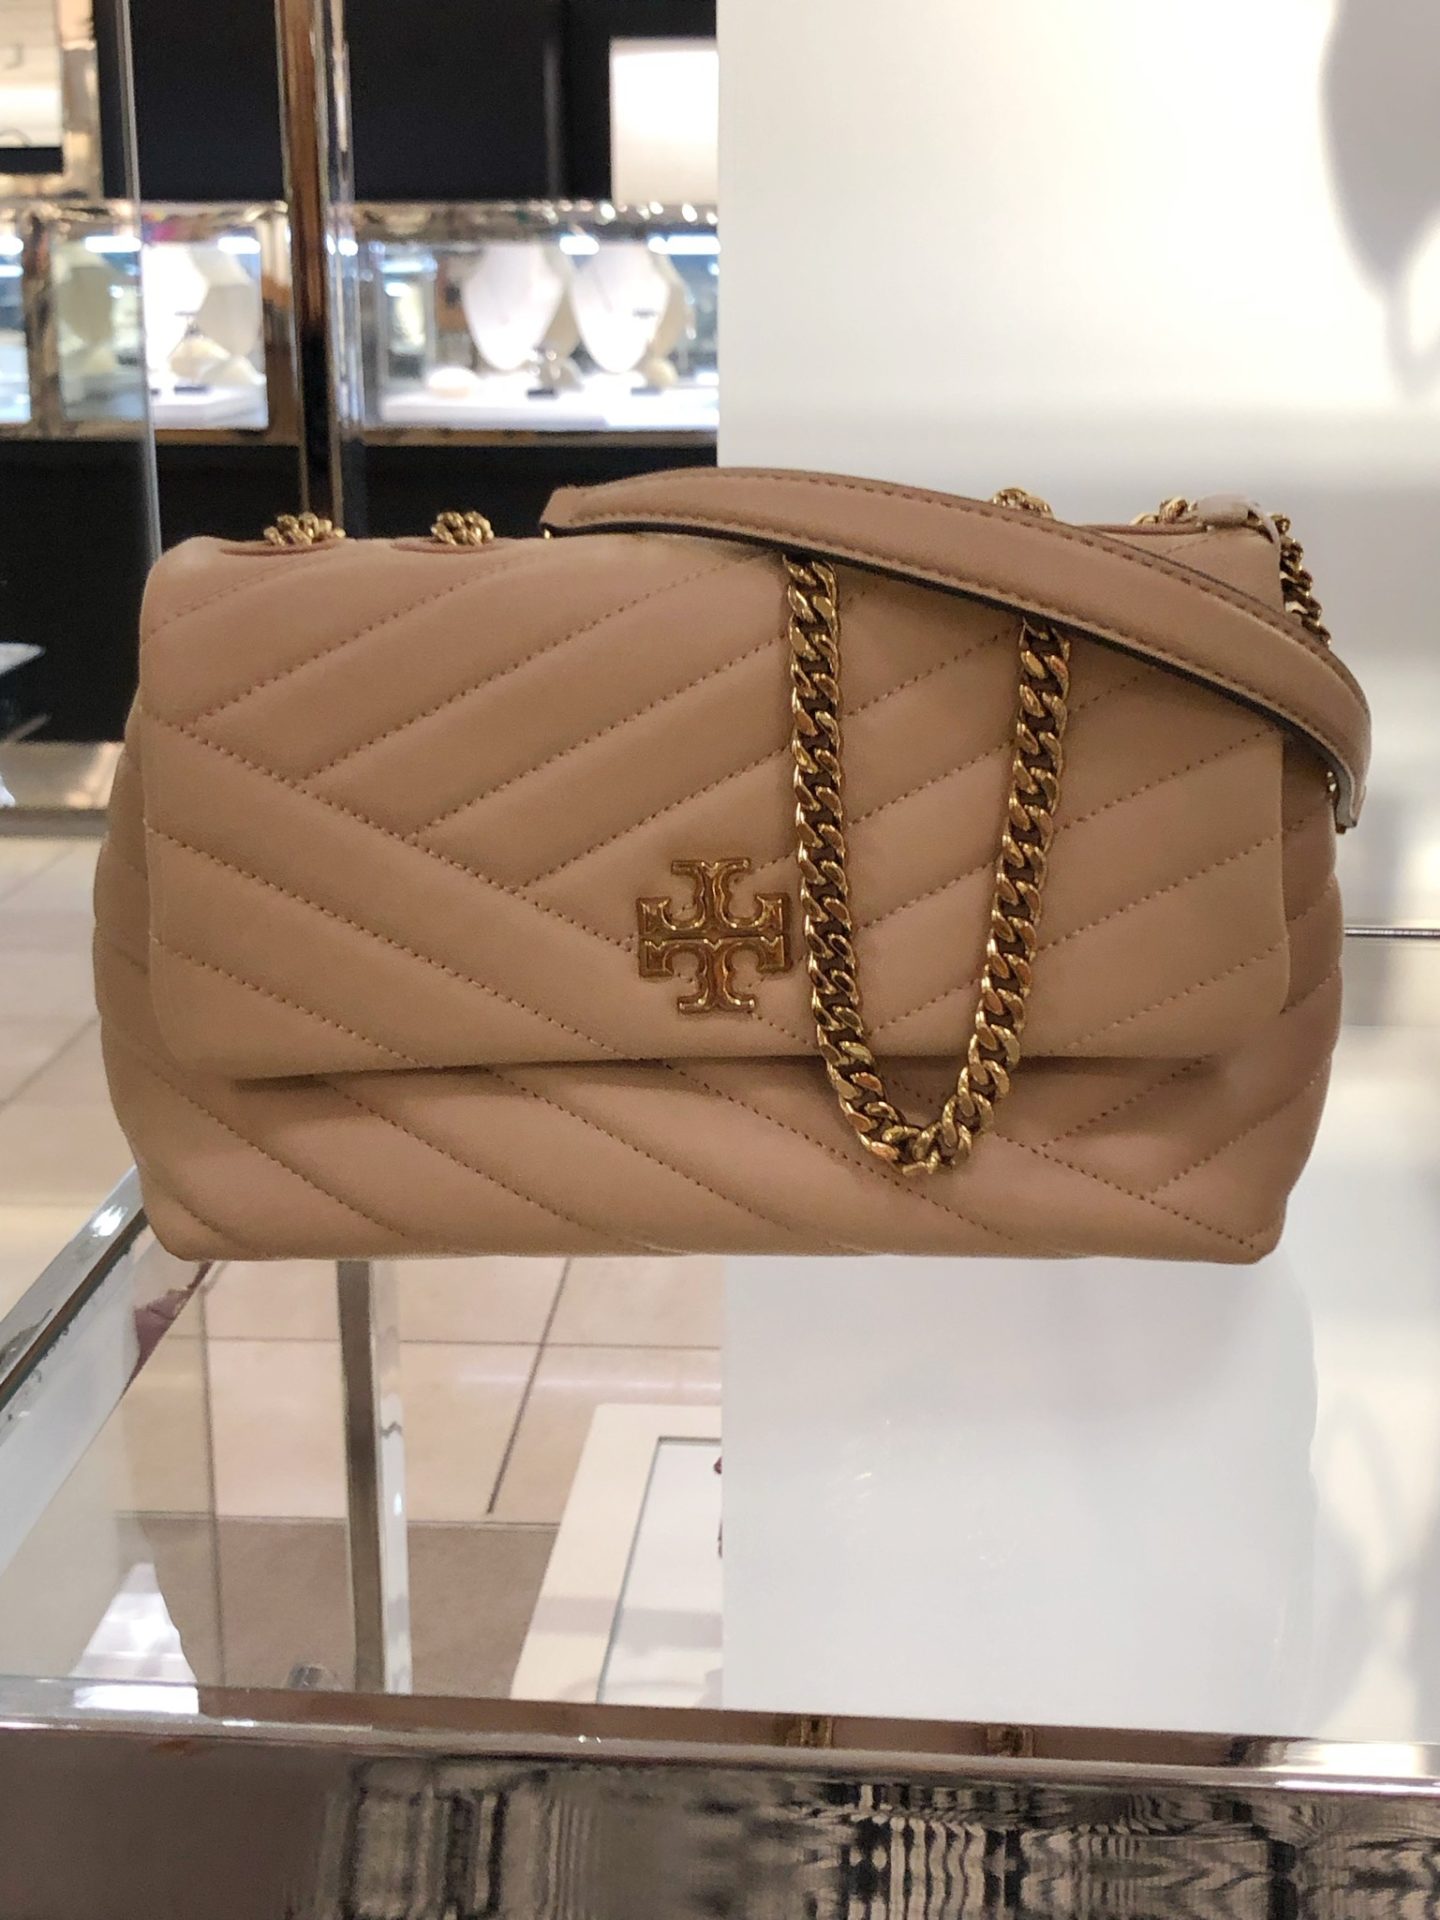 Tory Burch Fall Event 2020 | Save Up To 30% Off + Free Shipping! - The ...